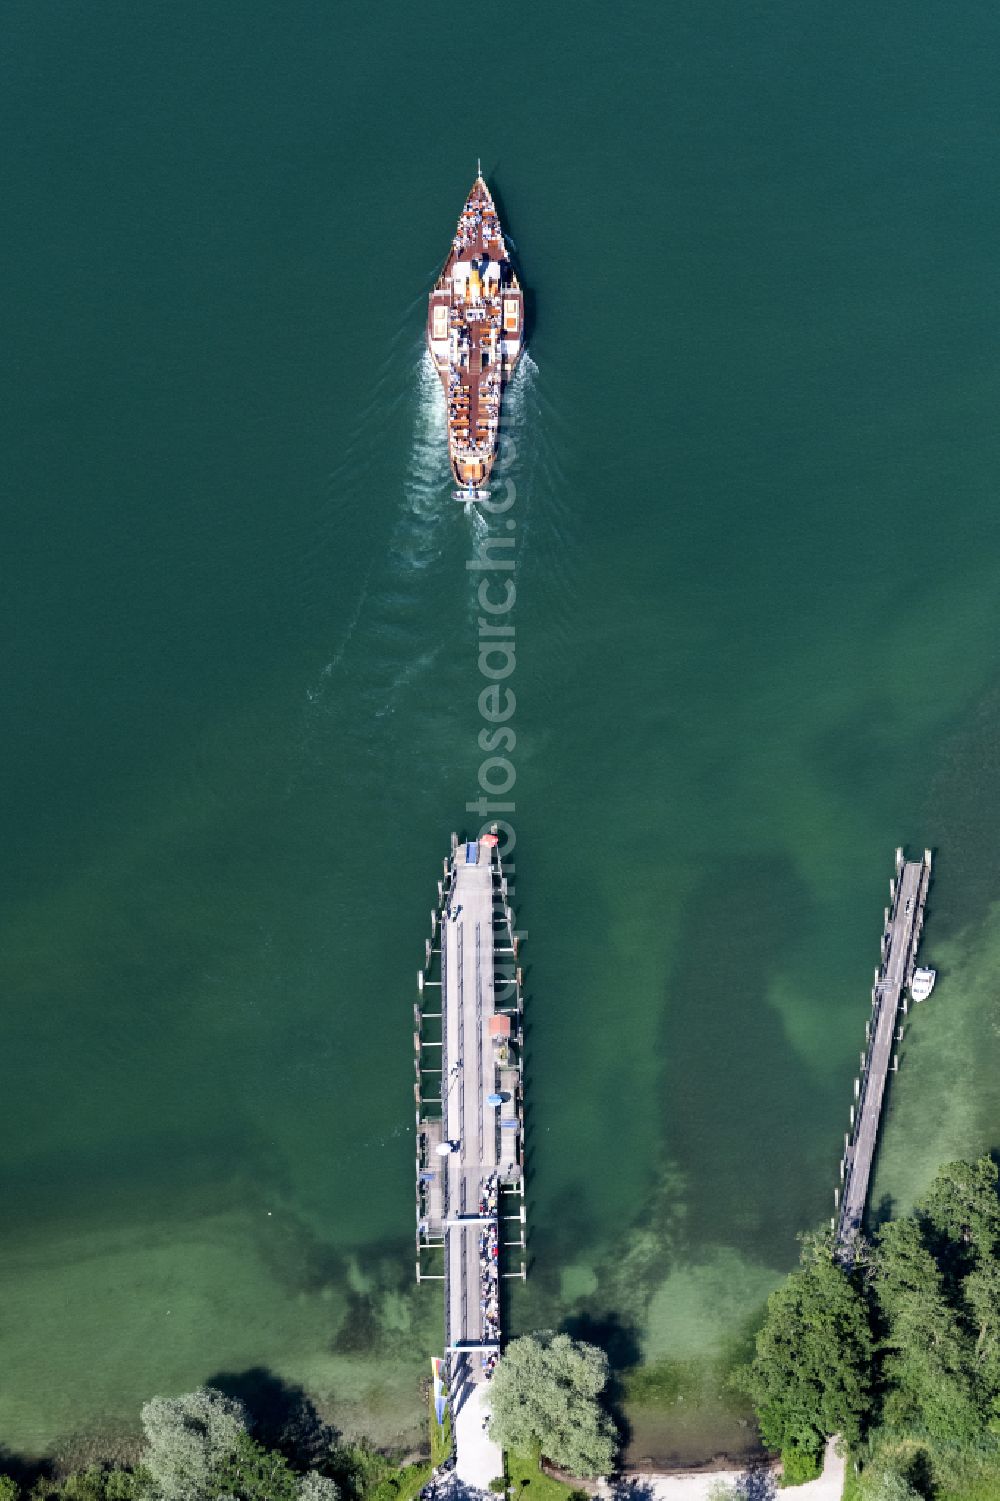 Chiemsee from the bird's eye view: Passenger ship Raddampfer Ludwig Fessler in Chiemsee in the state Bavaria, Germany